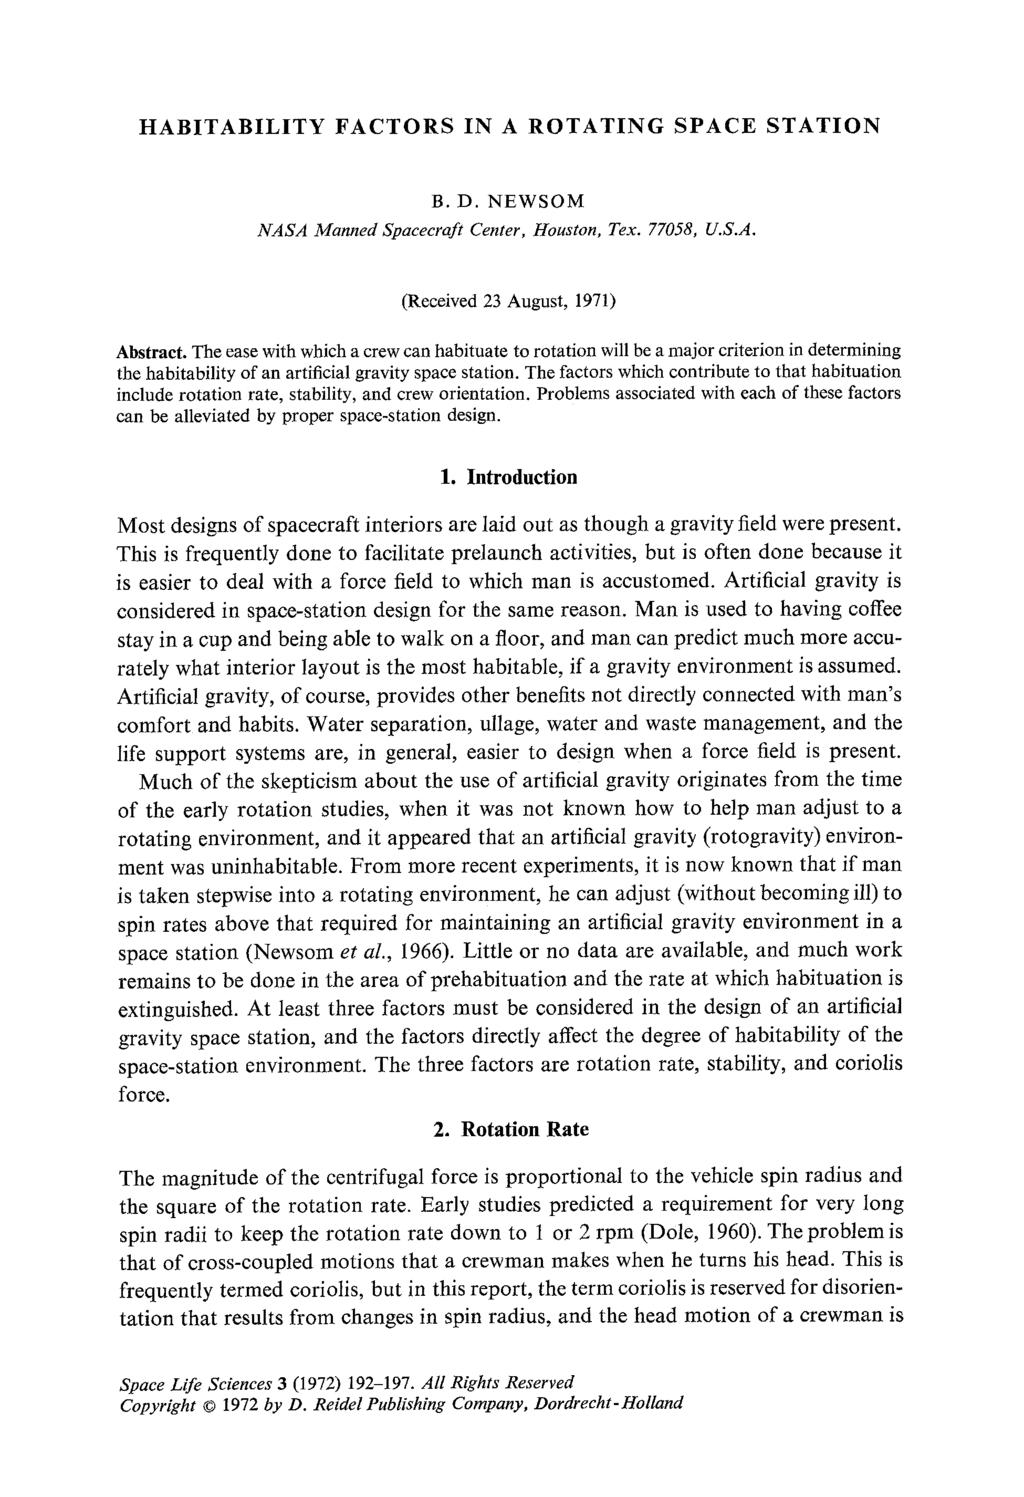 HABITABILITY FACTORS IN A ROTATING SPACE STATION B. D. NEWSOM NASA Manned Spacecraft Center, Houston, Tex. 77058, U.S.A. (Received 23 August, 1971) Abstract.